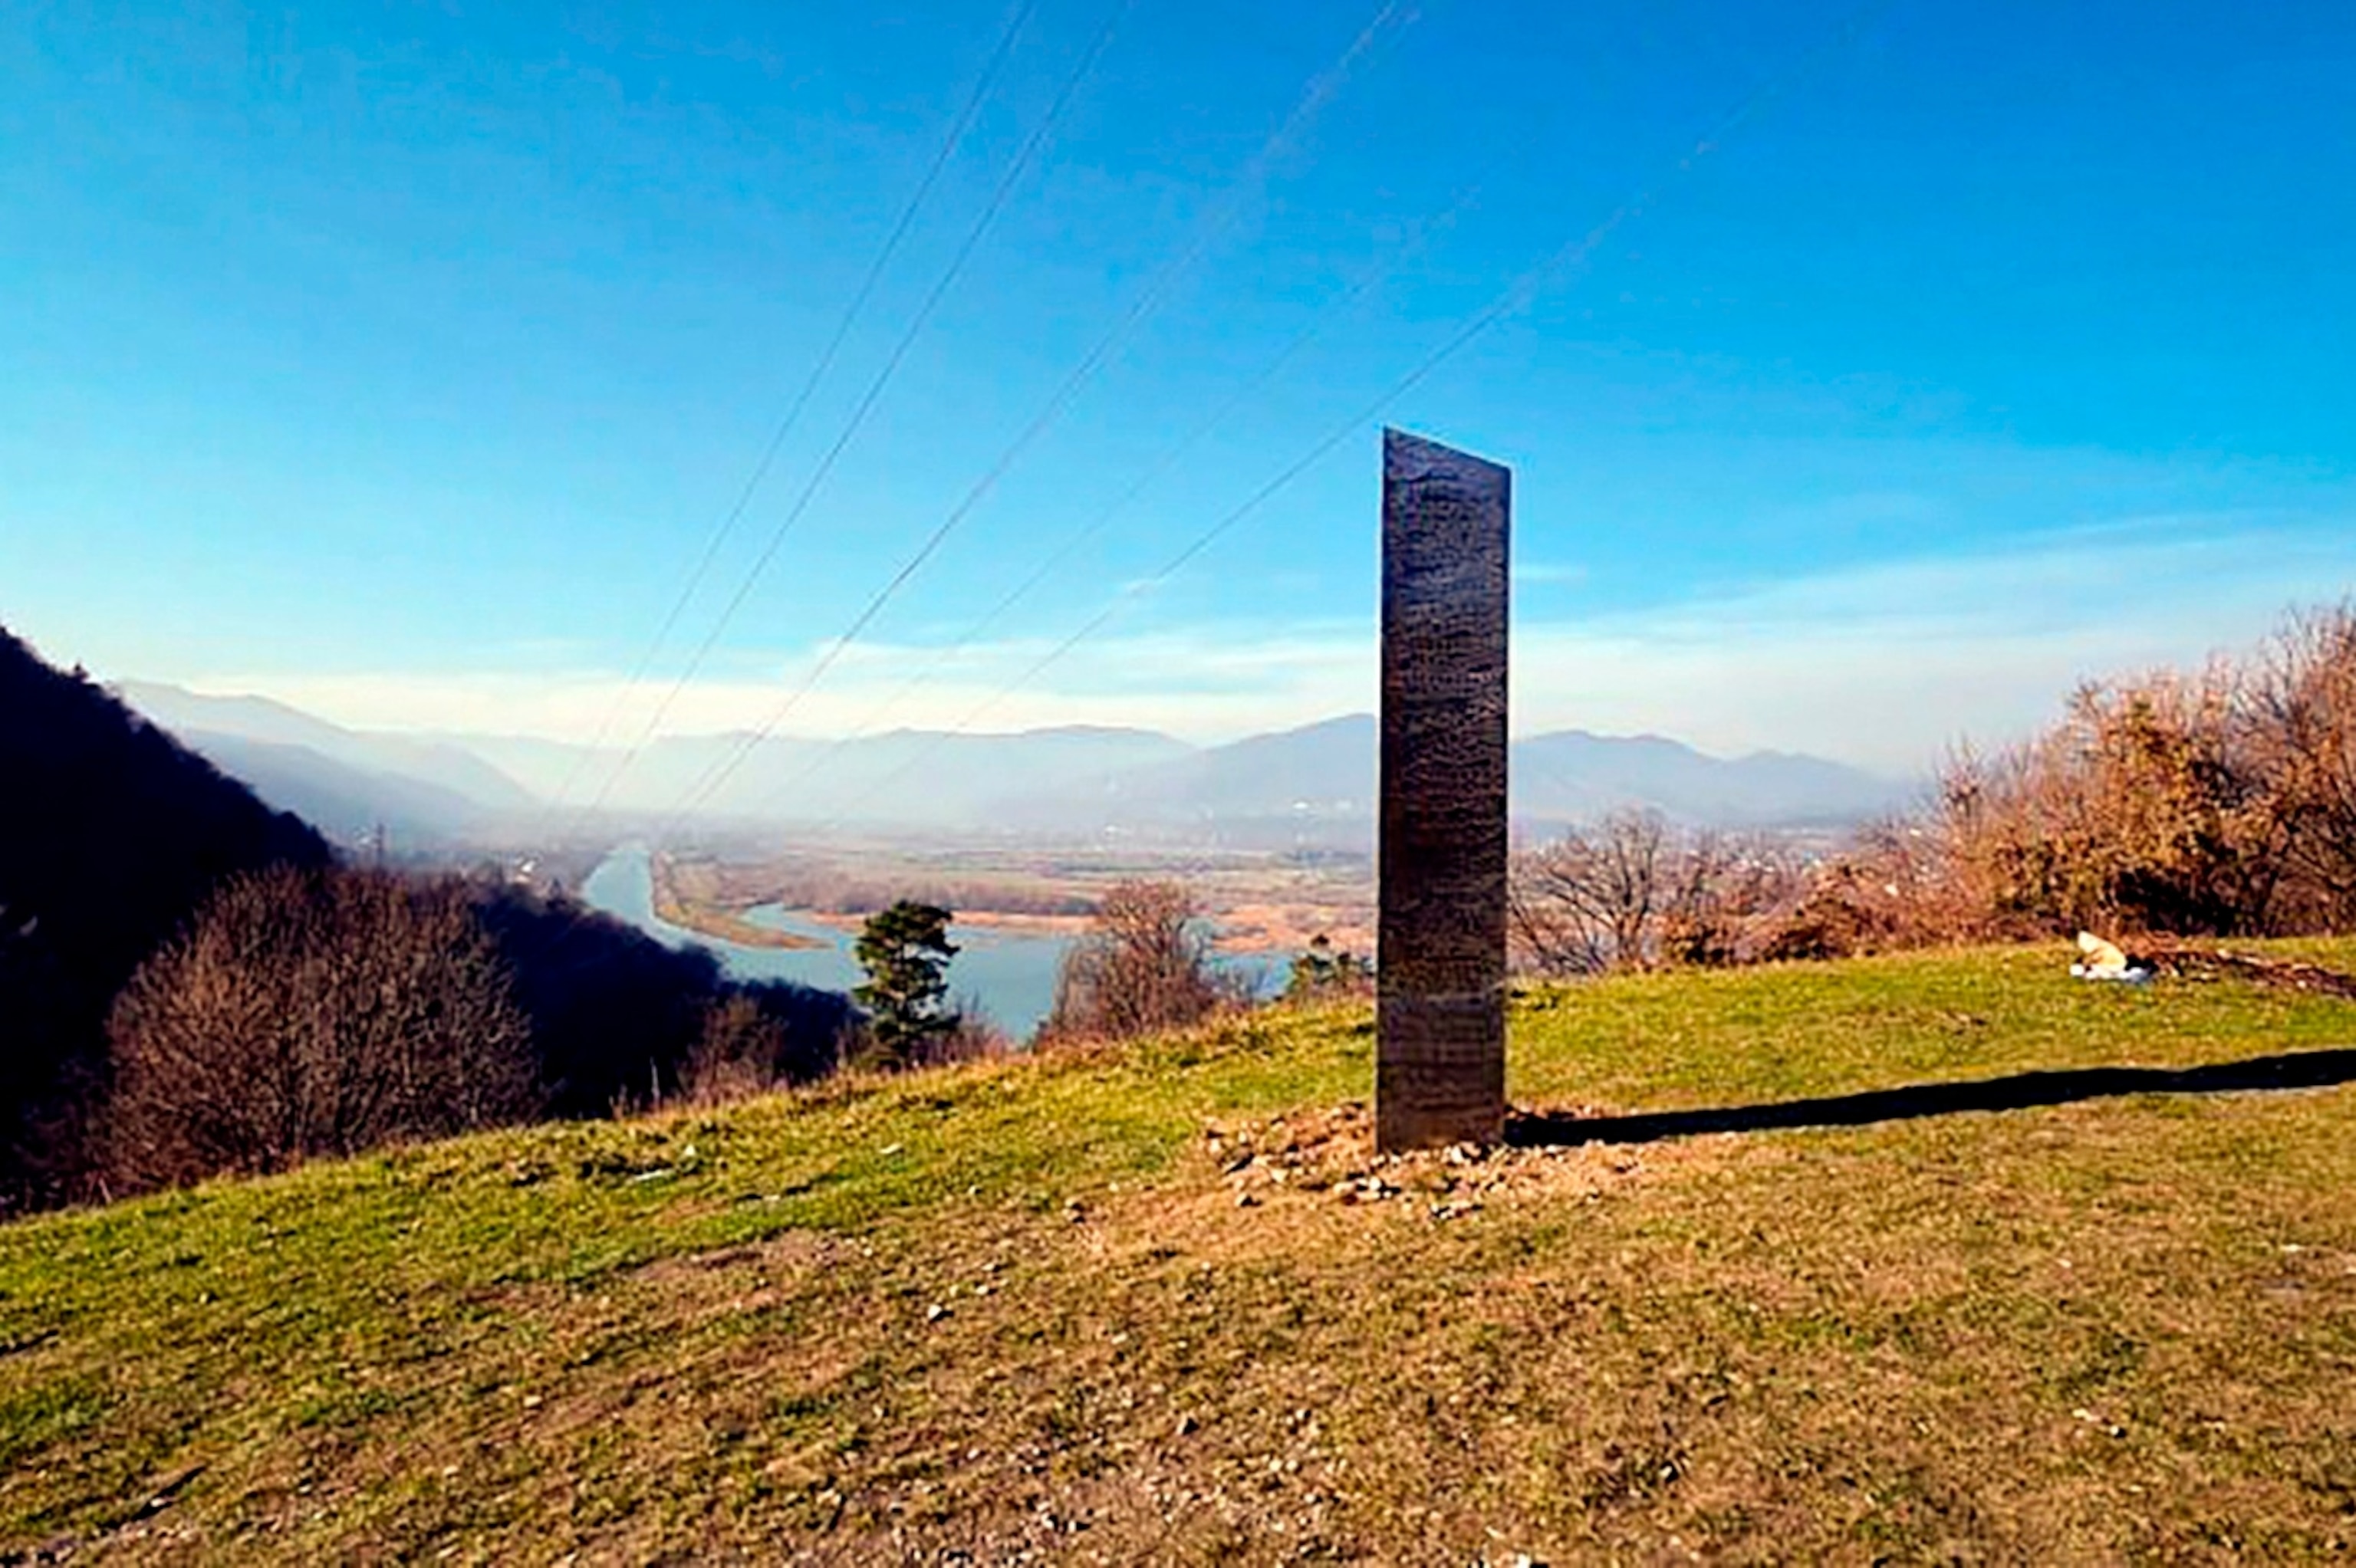 PHOTO: In this Nov. 27, 2020, file photo, a metal structure sticks out from the ground on the Batca Doamnei hill, outside Piatra Neamt, northern Romania.